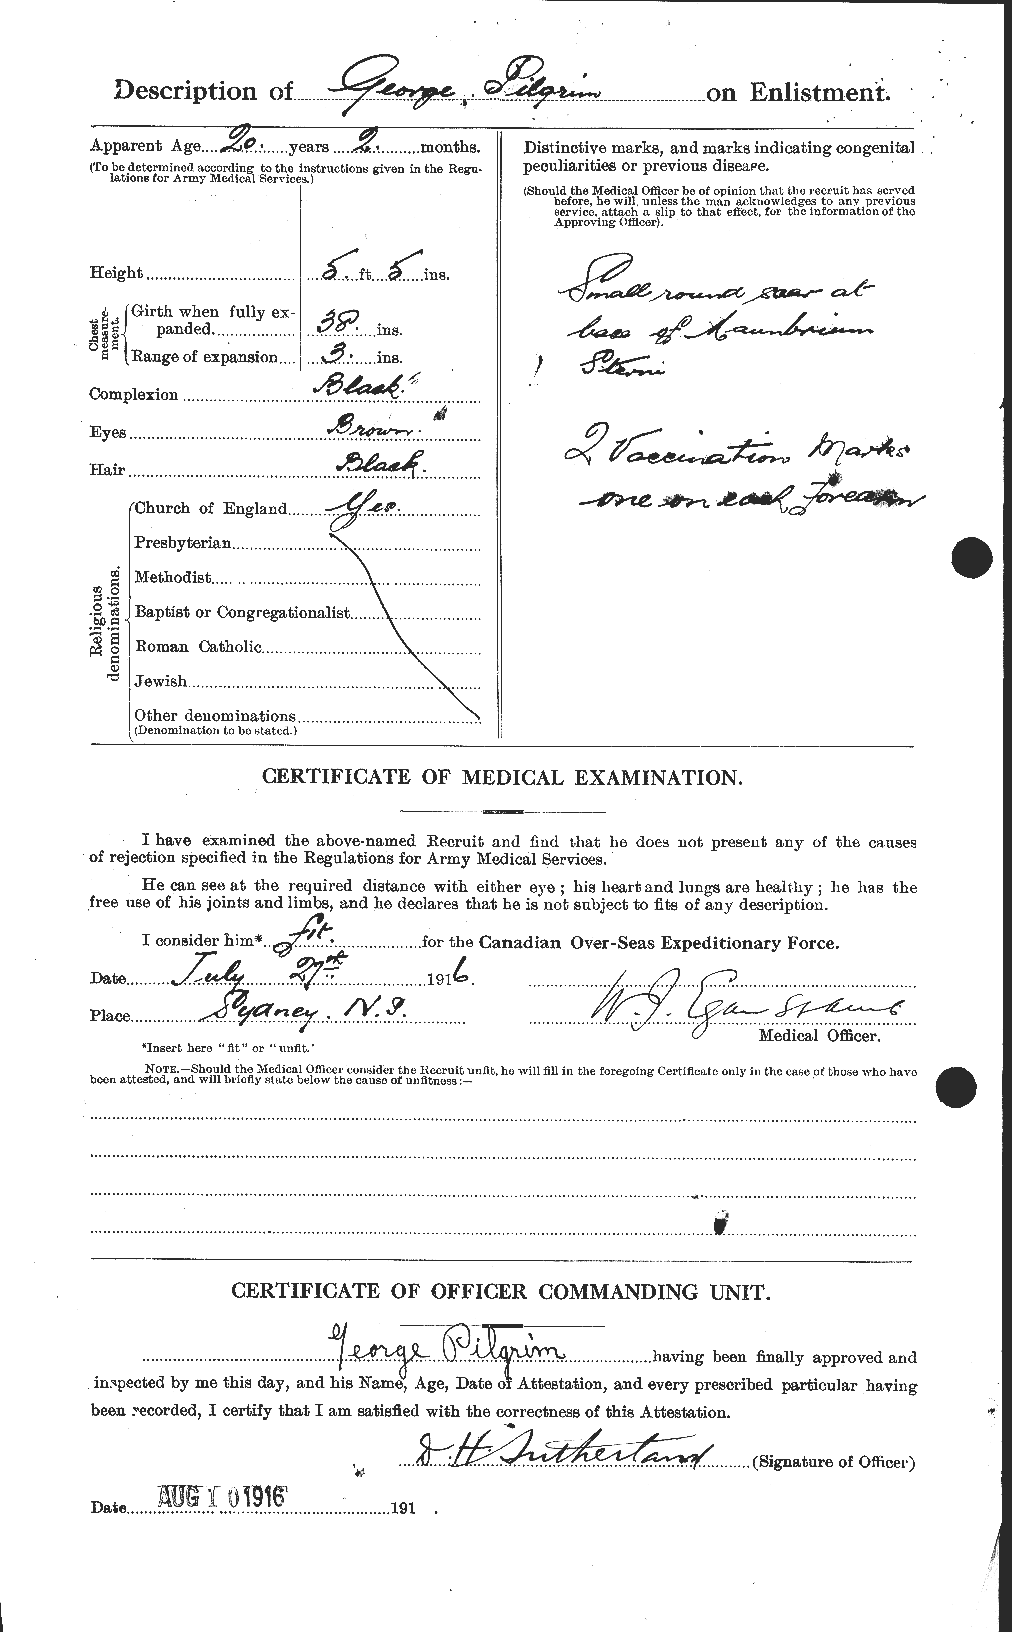 Personnel Records of the First World War - CEF 582293b